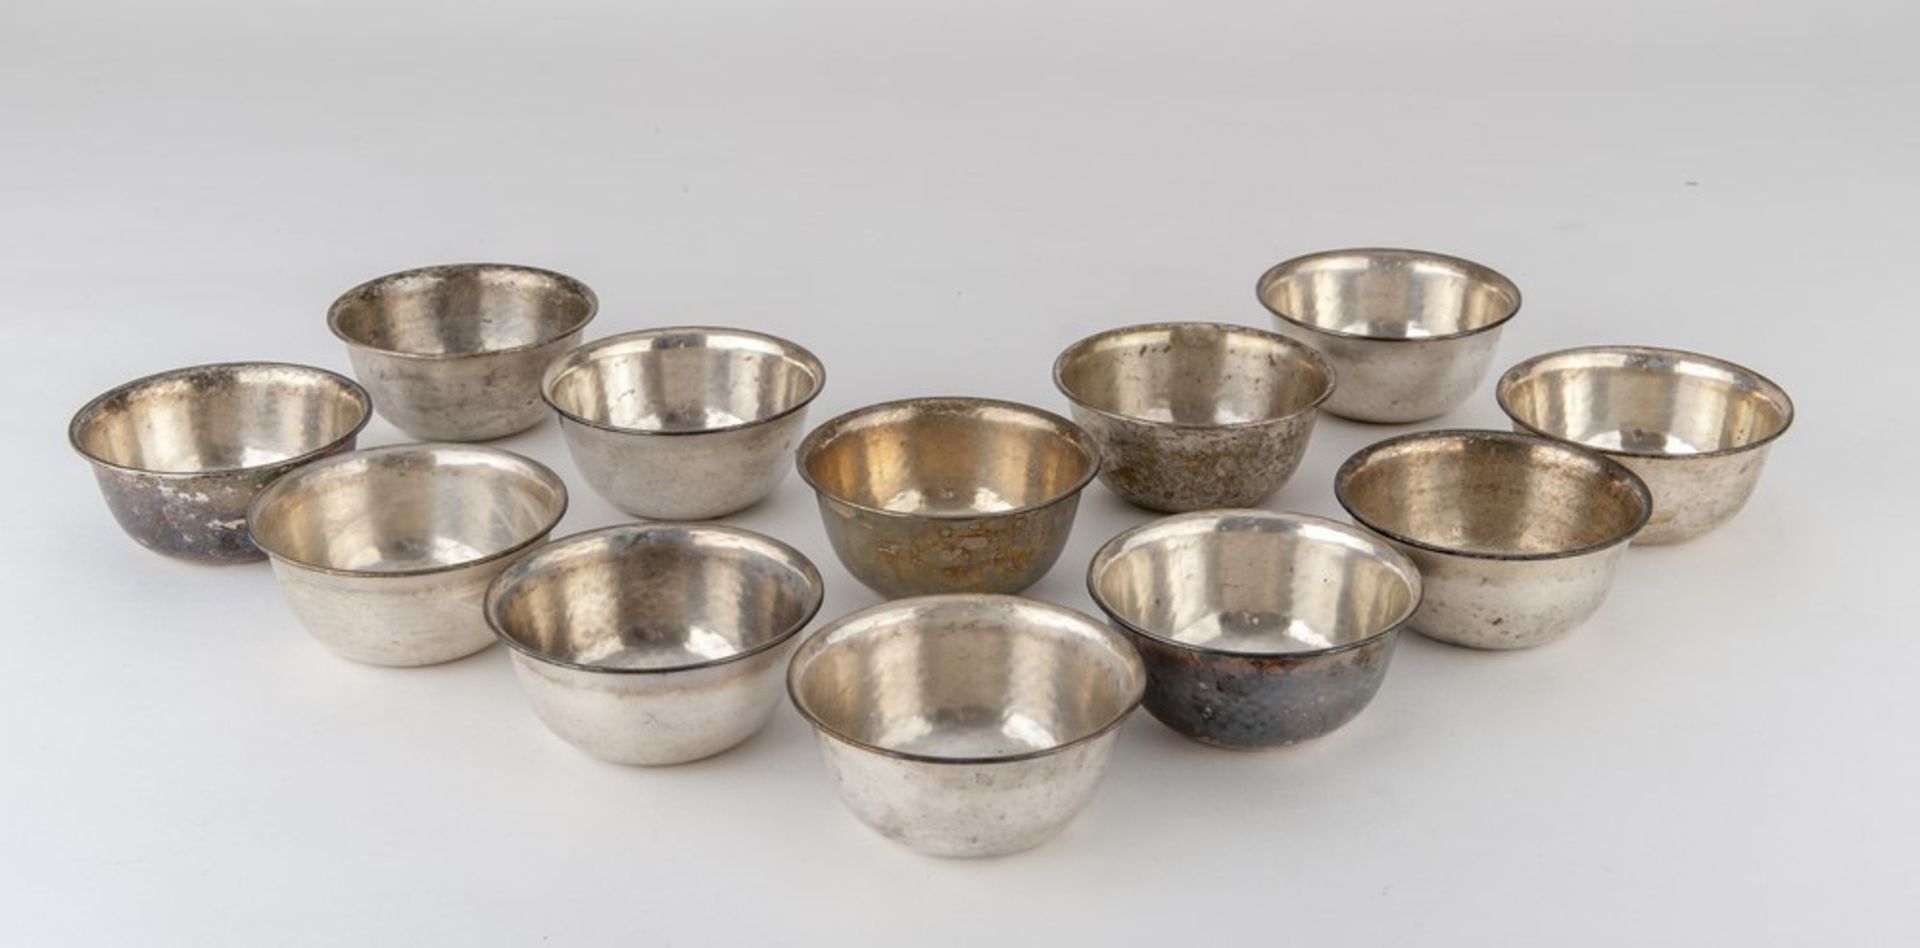 TWELVE FRUIT SALAD CUPS IN SILVER-PLATED METAL, 20TH CENTURY Measures cm. 5,5 x 12. DODICI COPPE